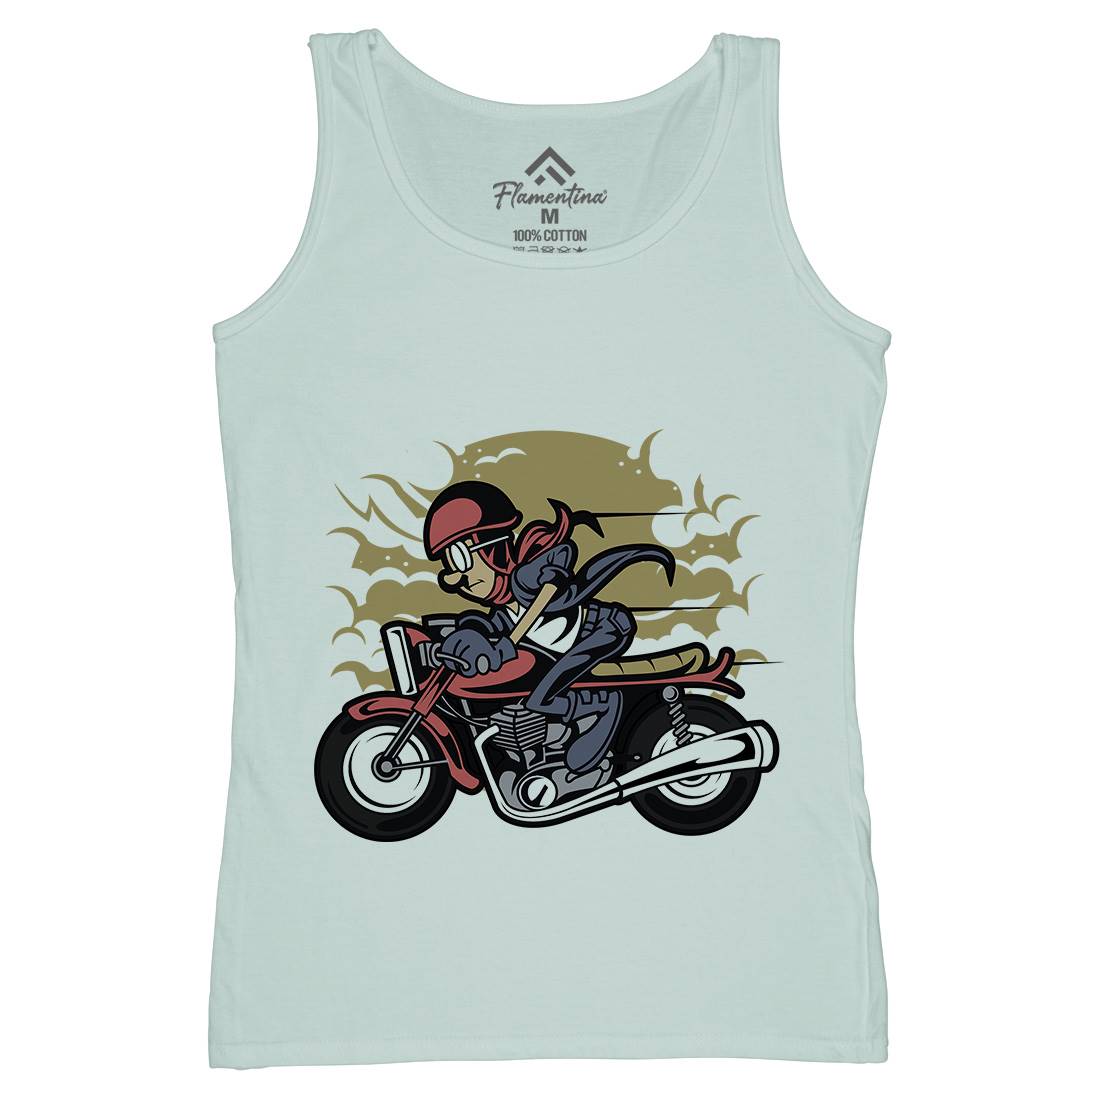 Caferacer Womens Organic Tank Top Vest Motorcycles C325